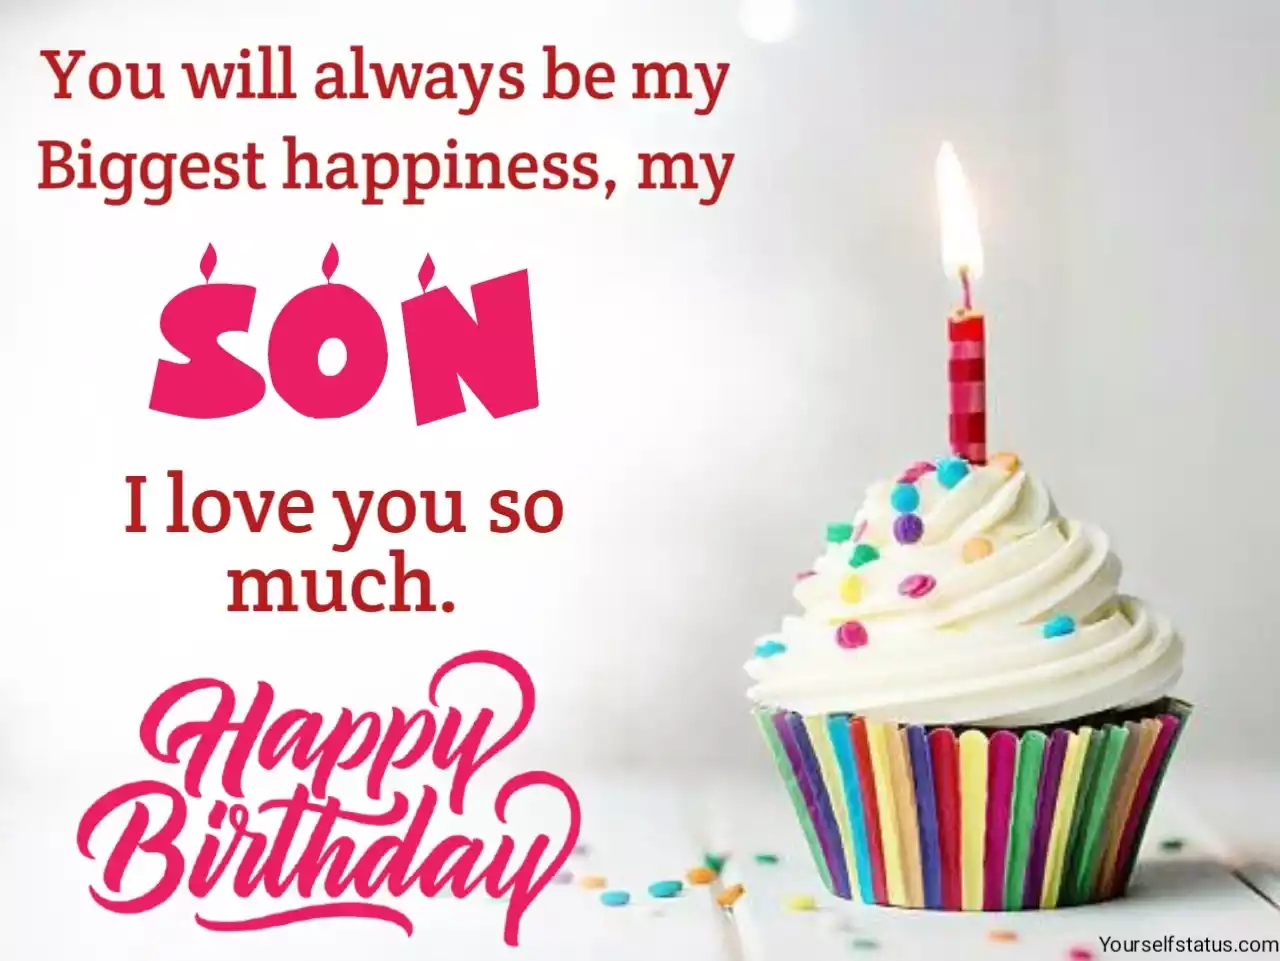 birthday wishes for son in english